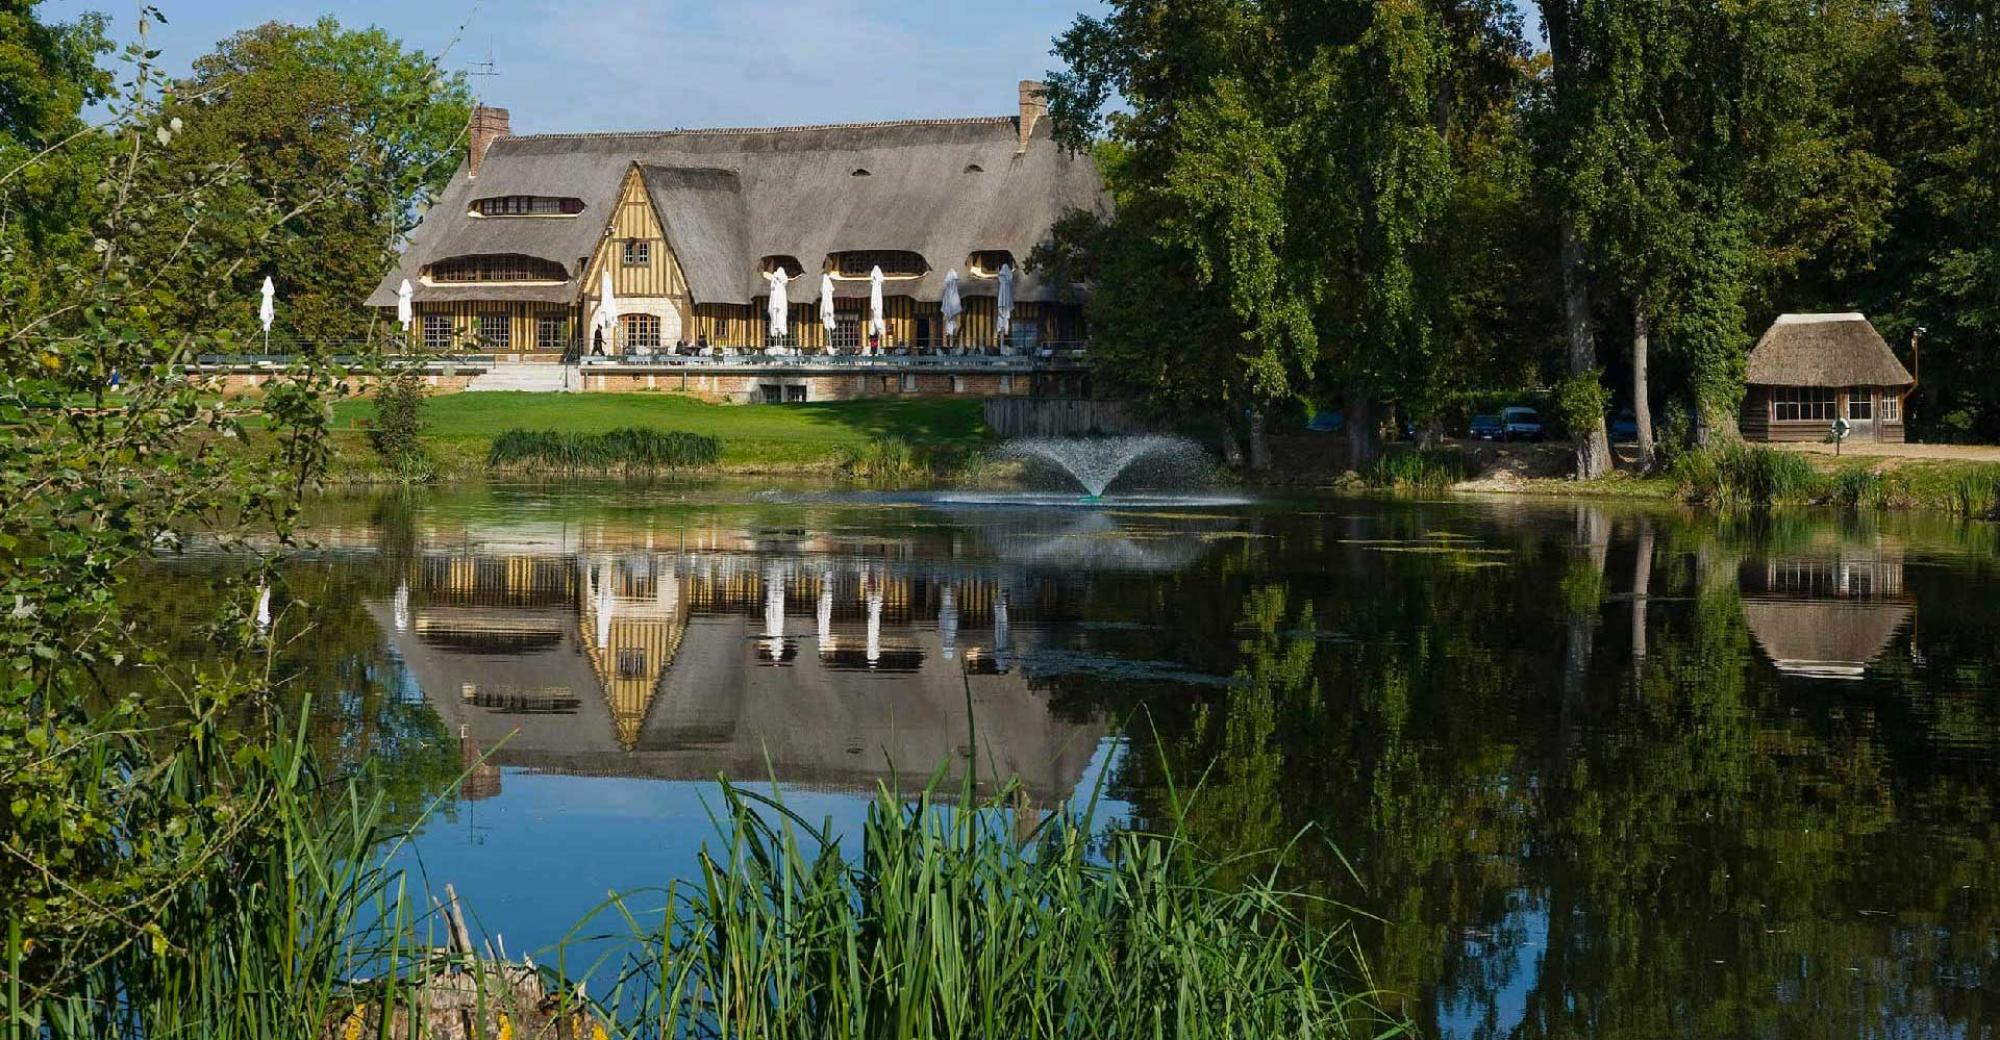 Golf du Vaudreuil provides lots of the best golf course in Normandy